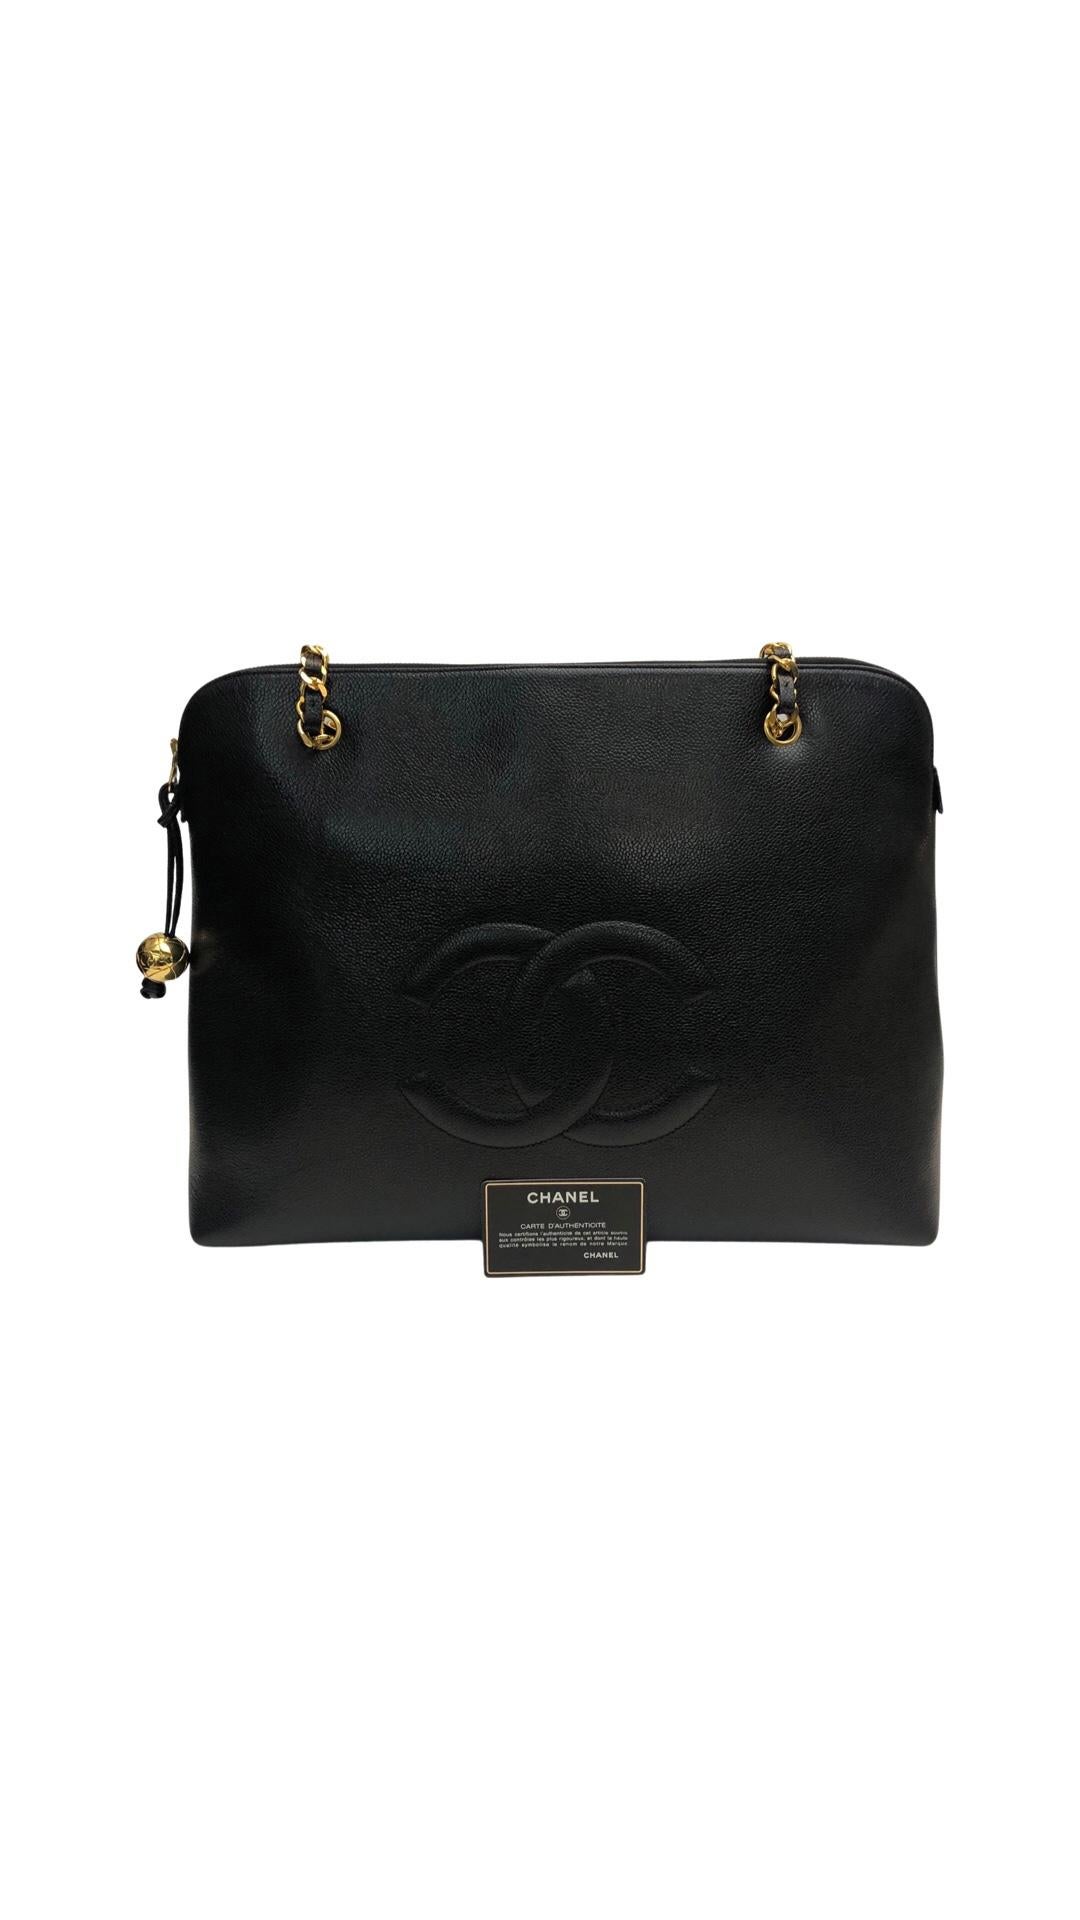 chanel cc embossed logo black white suede